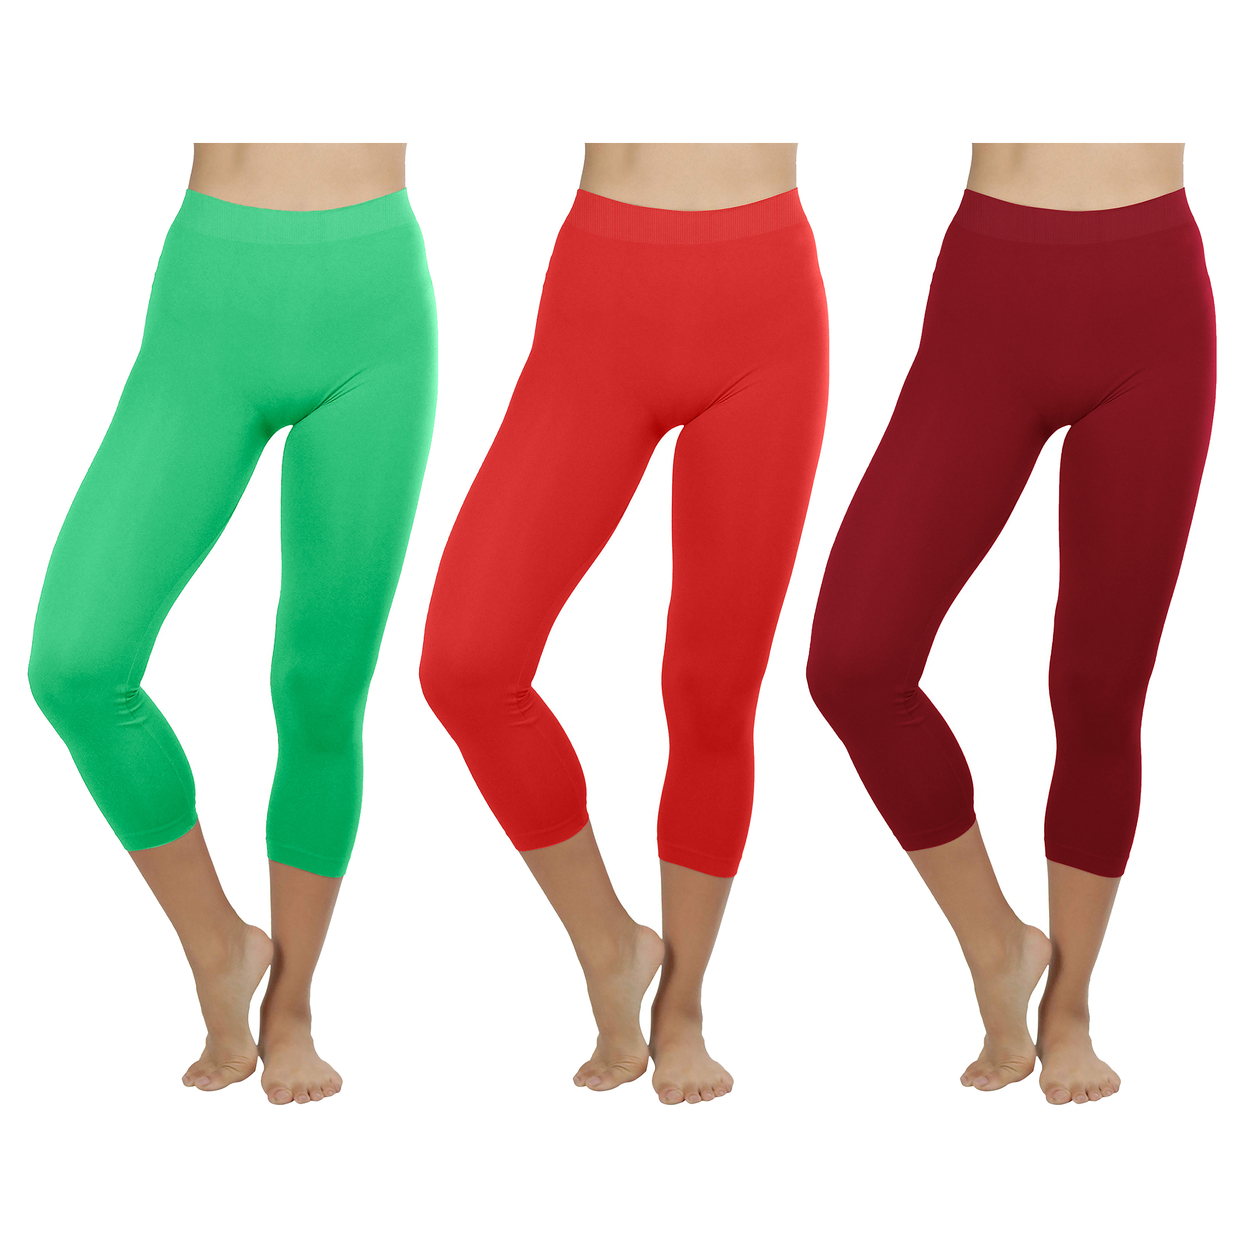 3-Pack: Women's Ultra-Soft High Waisted Smooth Stretch Active Yoga Capri Leggings - Red,red,red, Small